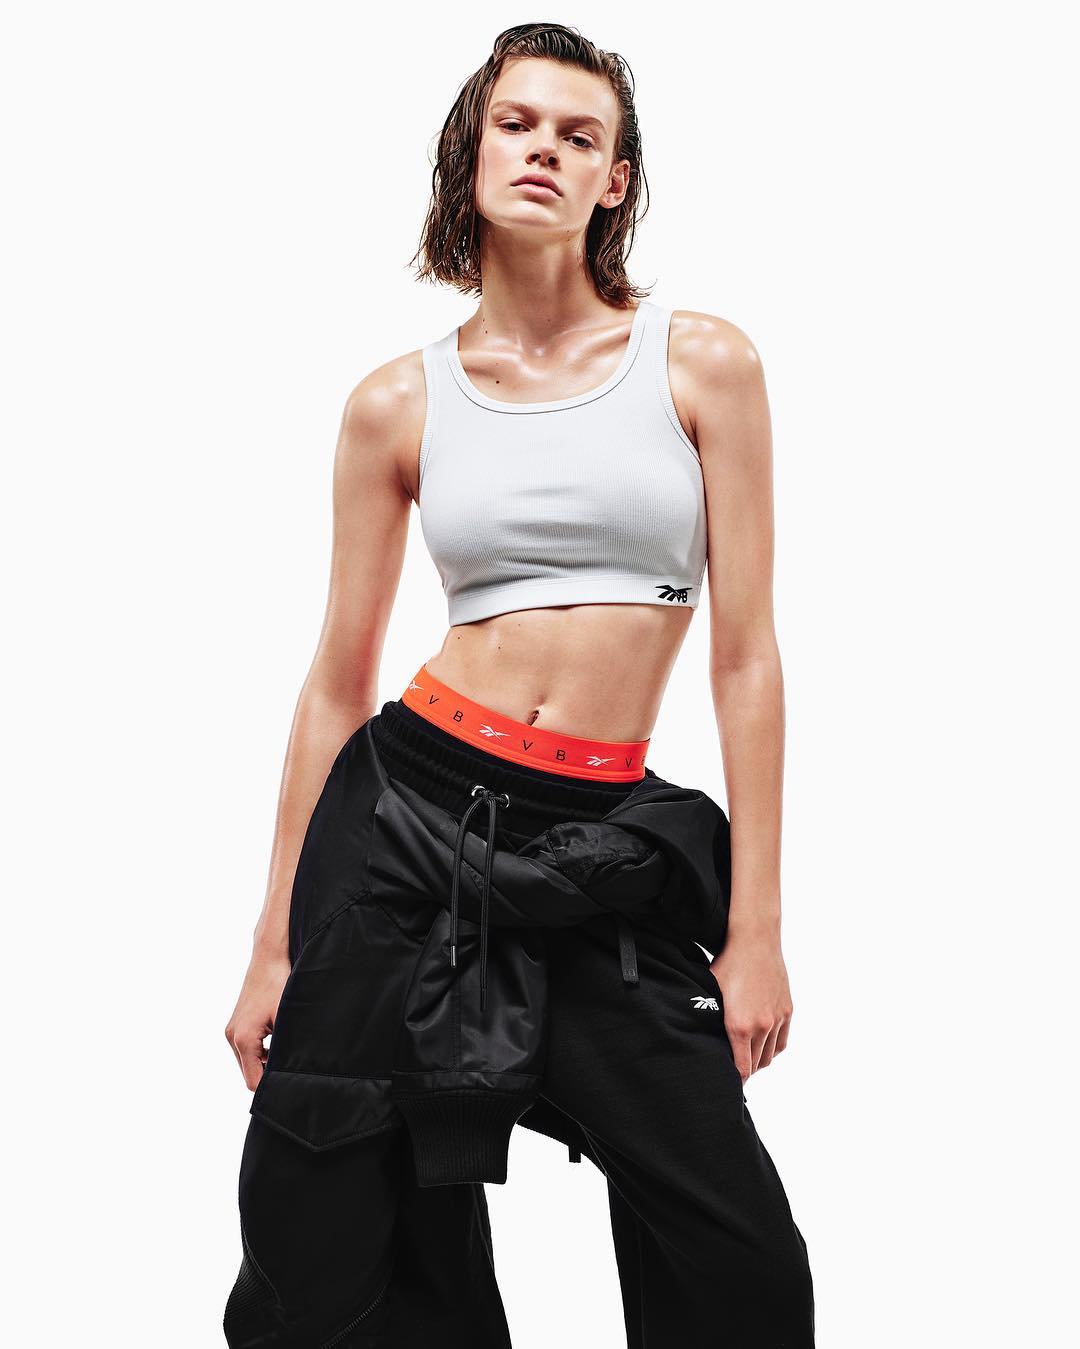 Victoria Beckham and Reebok Team Up For A Stylish Sports Gear